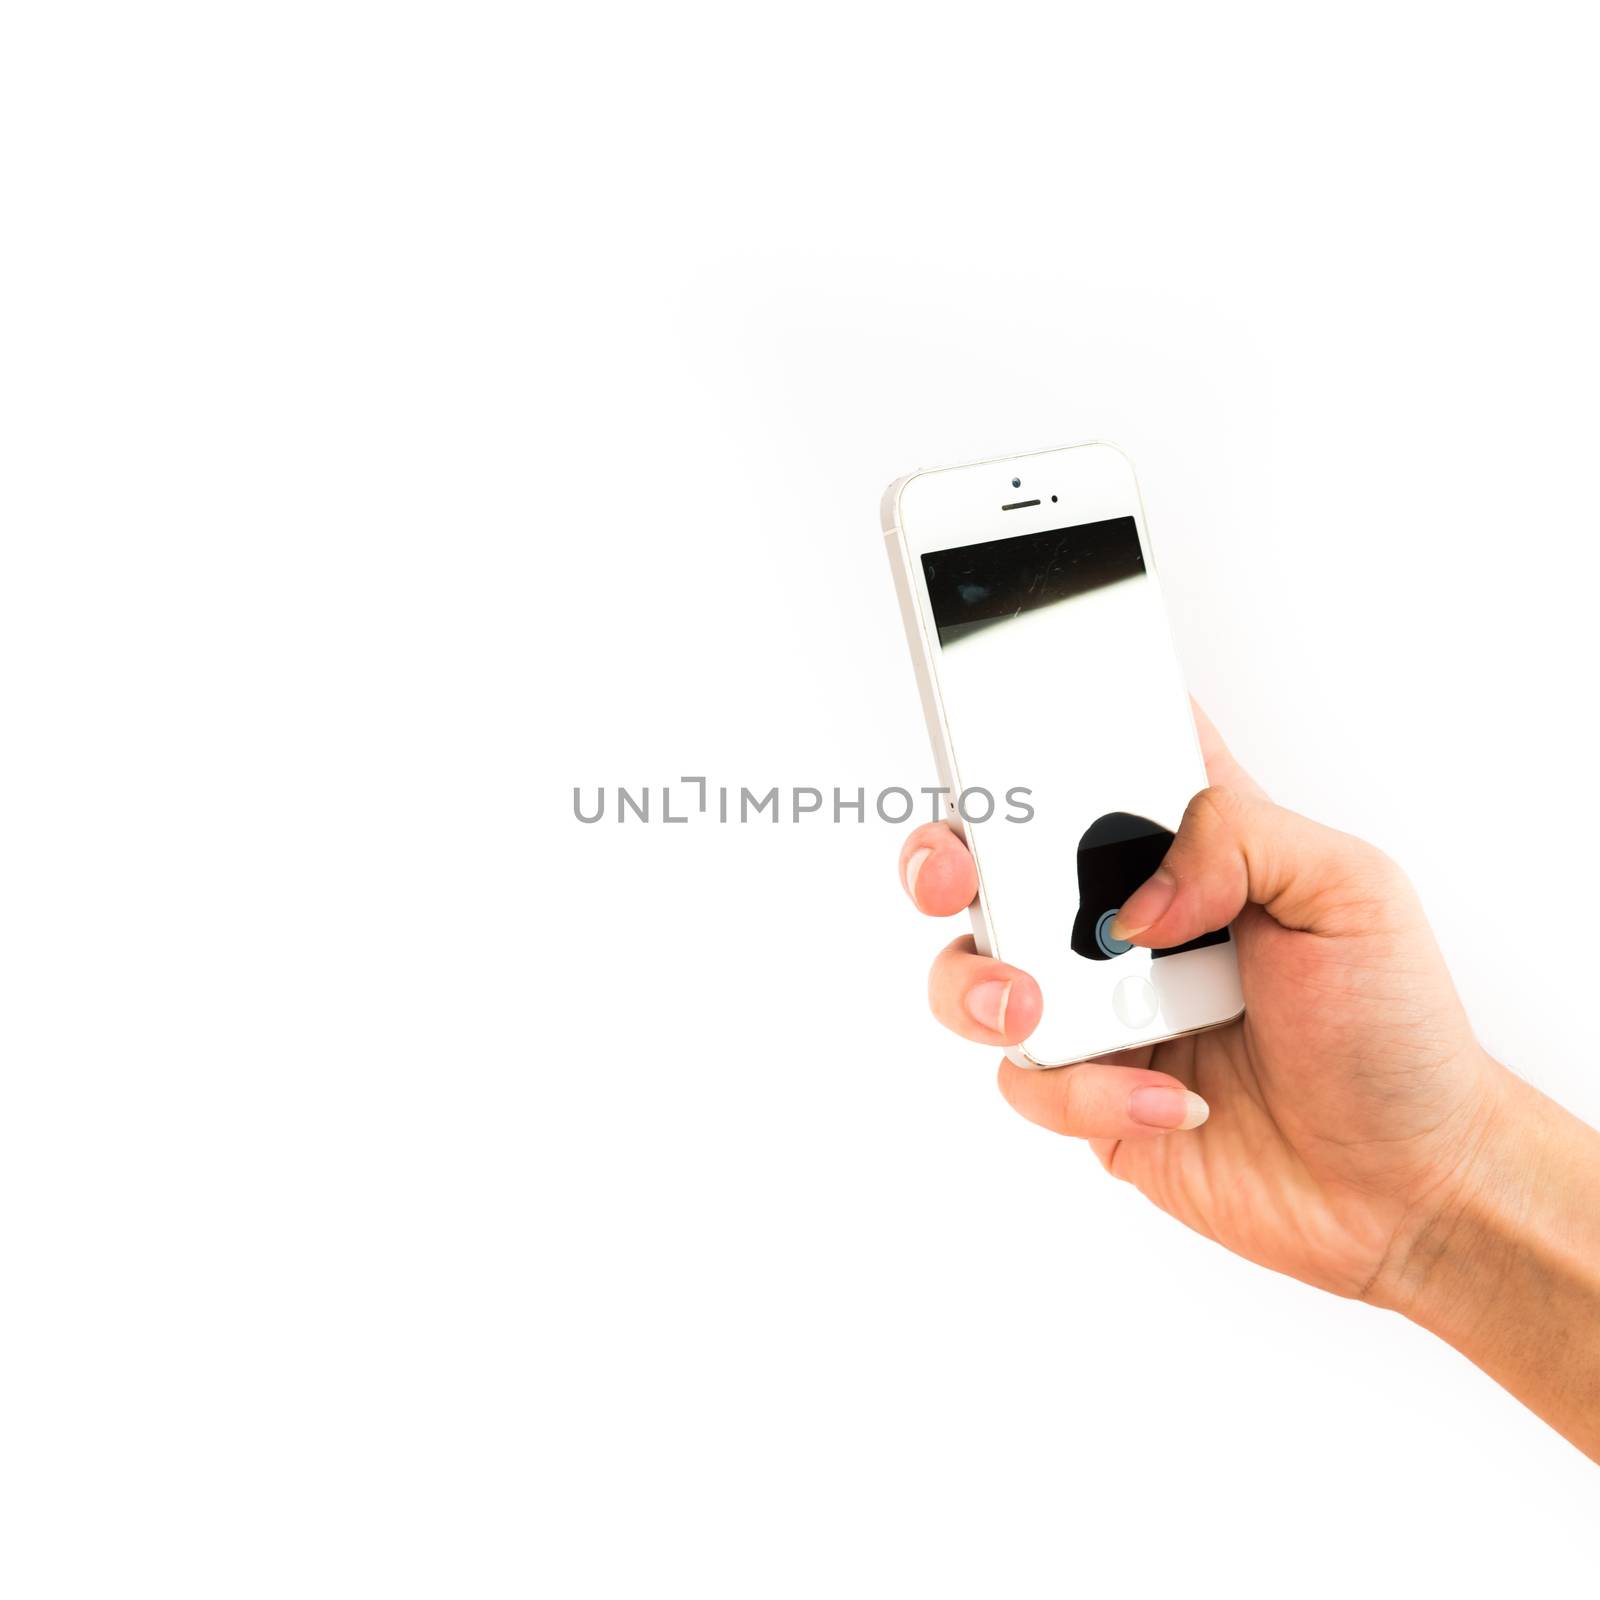 Studio shot of Asian man hand holding vertical white Smartphone with blank screen isolated on white background. Close-up finger taking photo on mobile phone concept with clipping path copy space